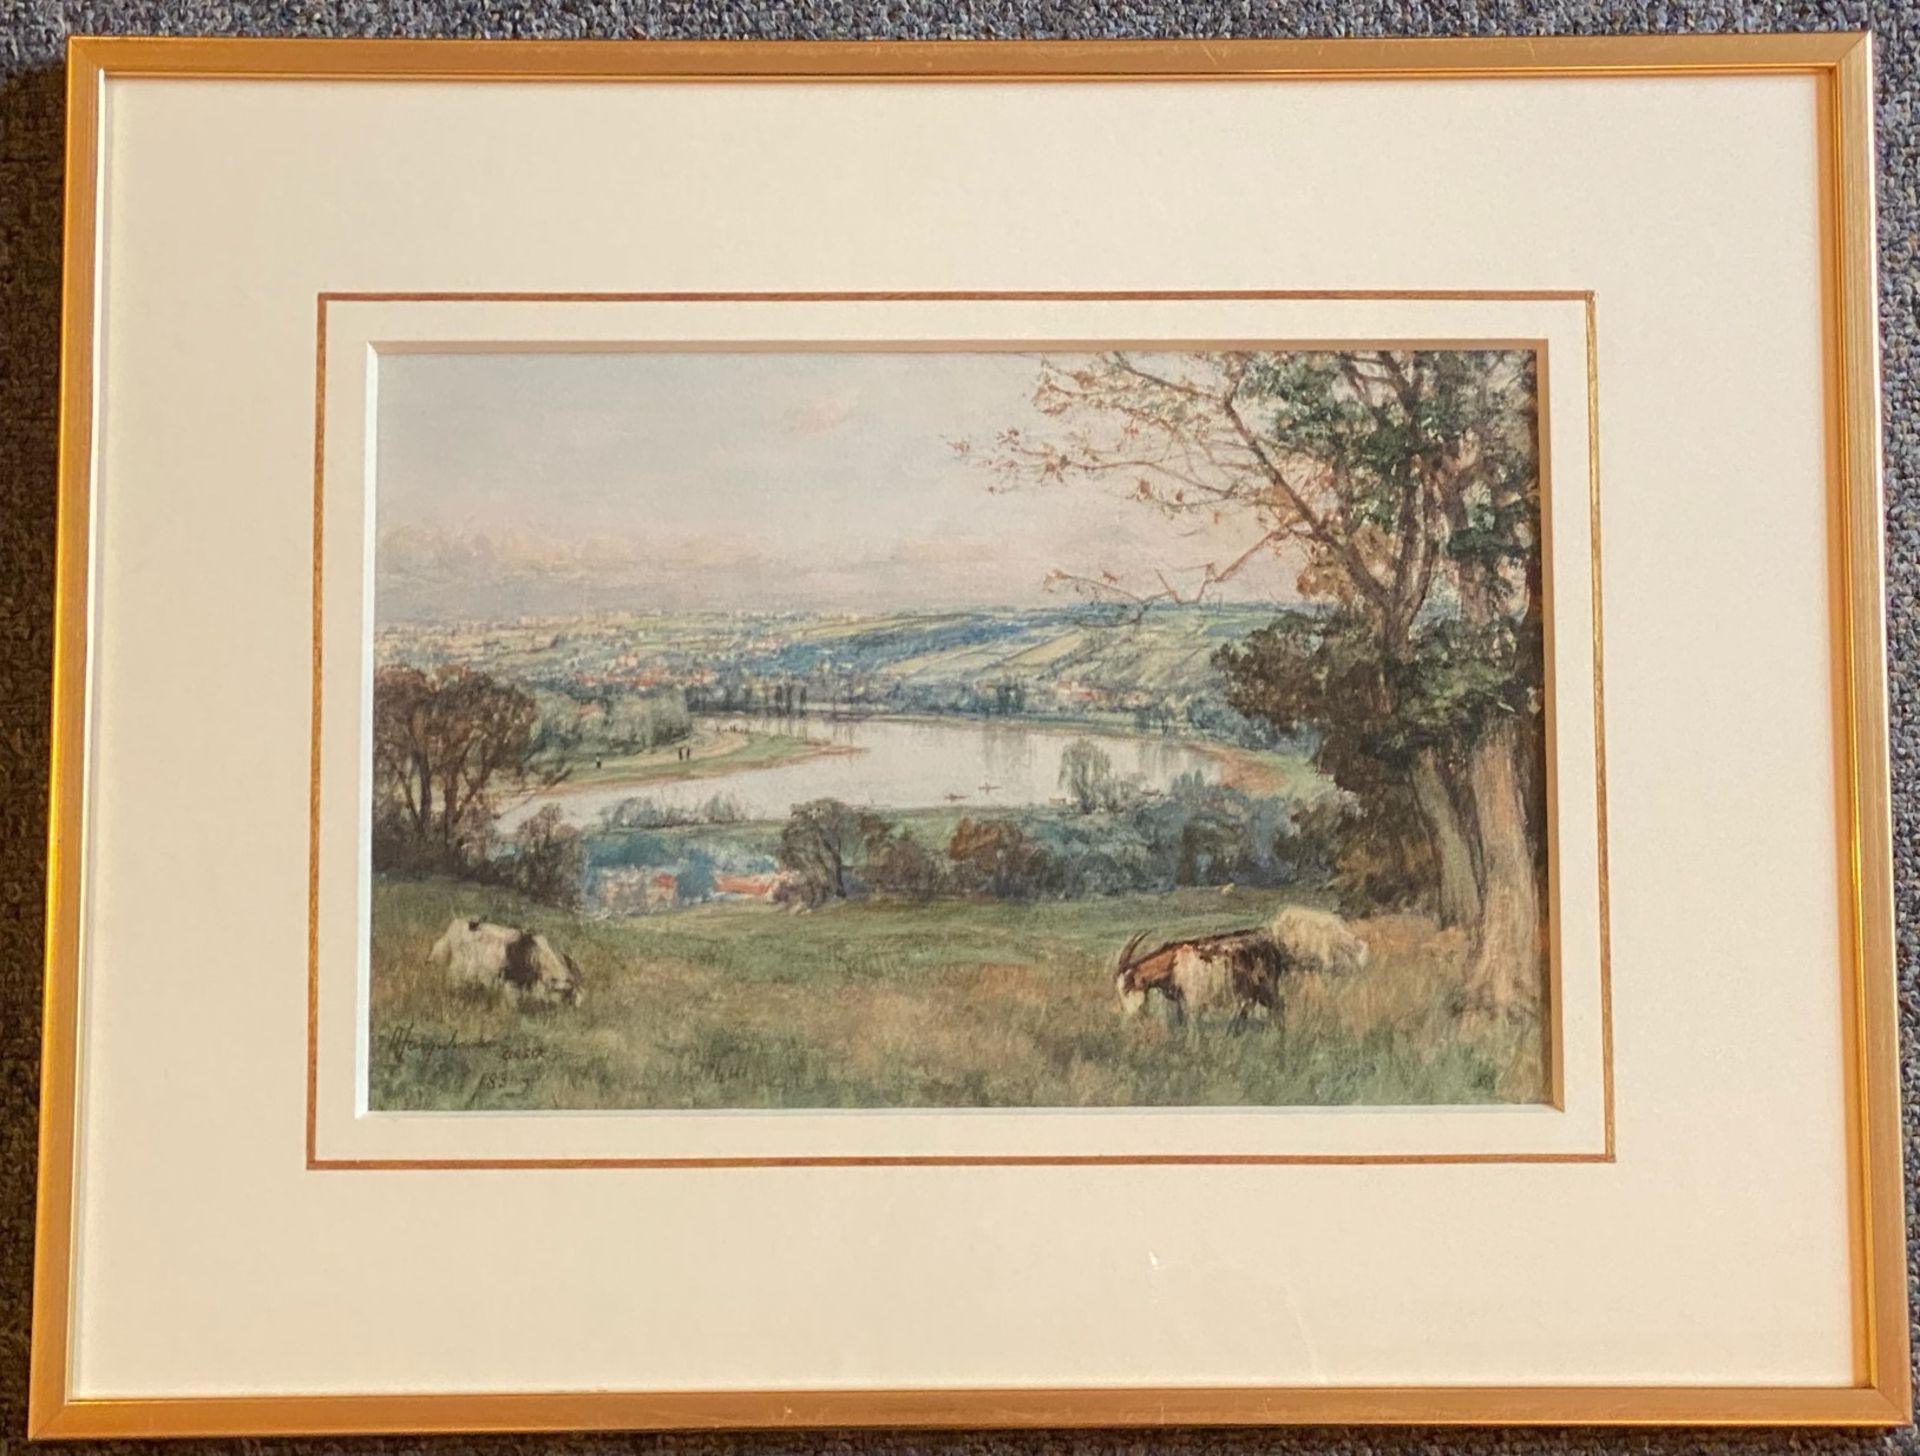 Goats grazing, St cloud overlooking Paris signed watercolour by Scottish artist David Farquharson - Image 2 of 3